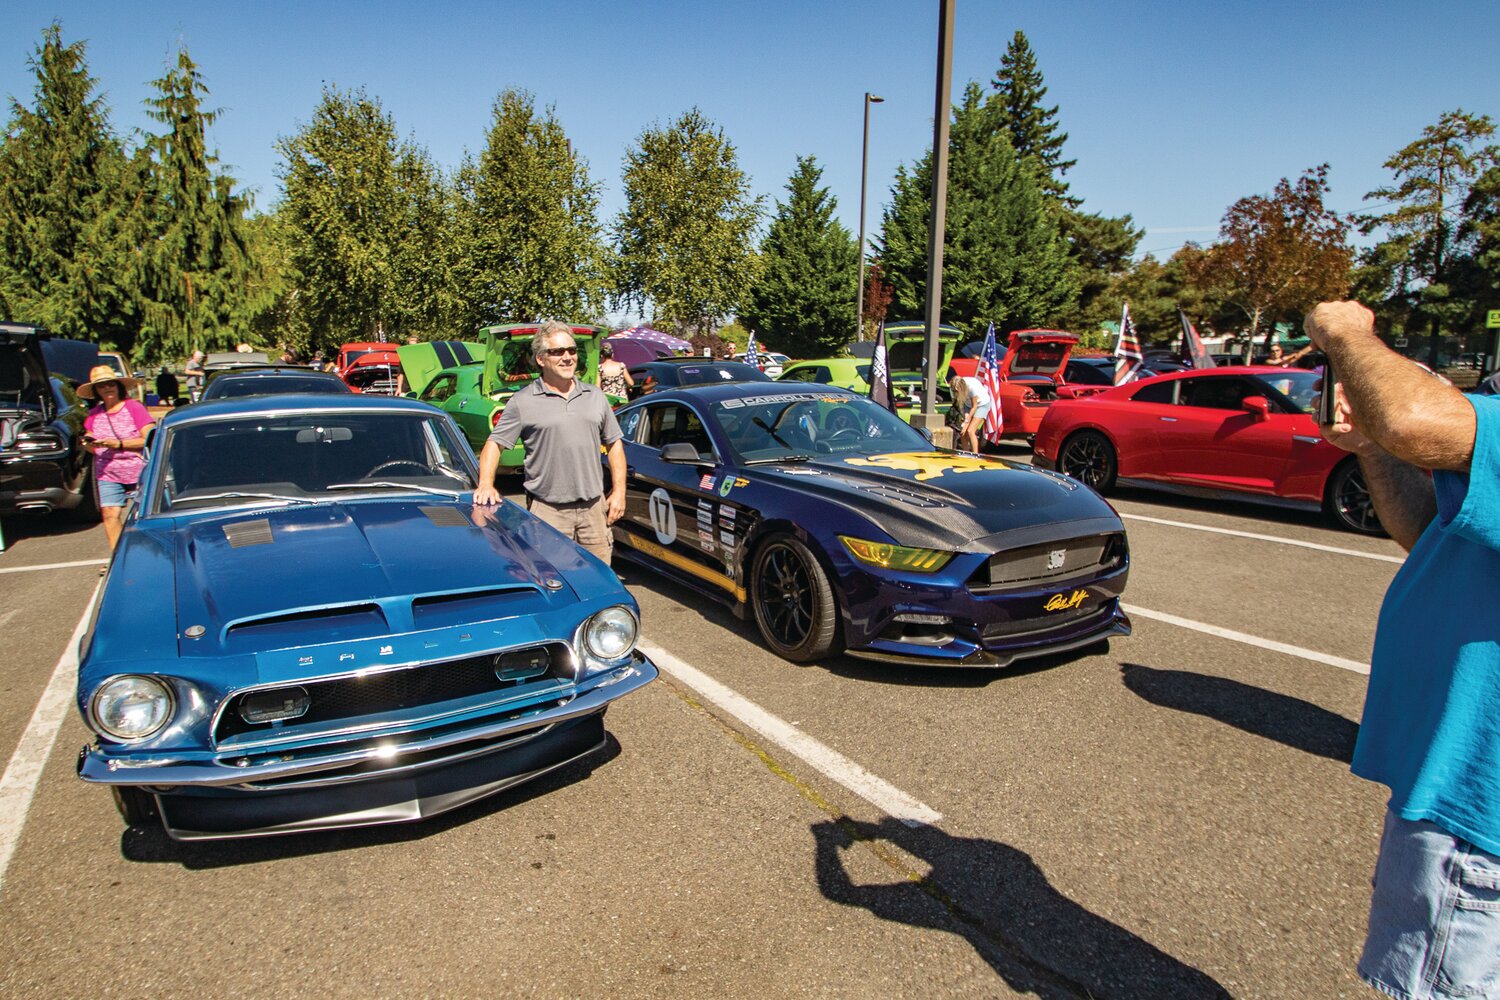 A car show participant stands next to a classic Ford Mustang Shelby GT 350 at the Yelm FFA Alumni Association car show at Yelm High School this past weekend.